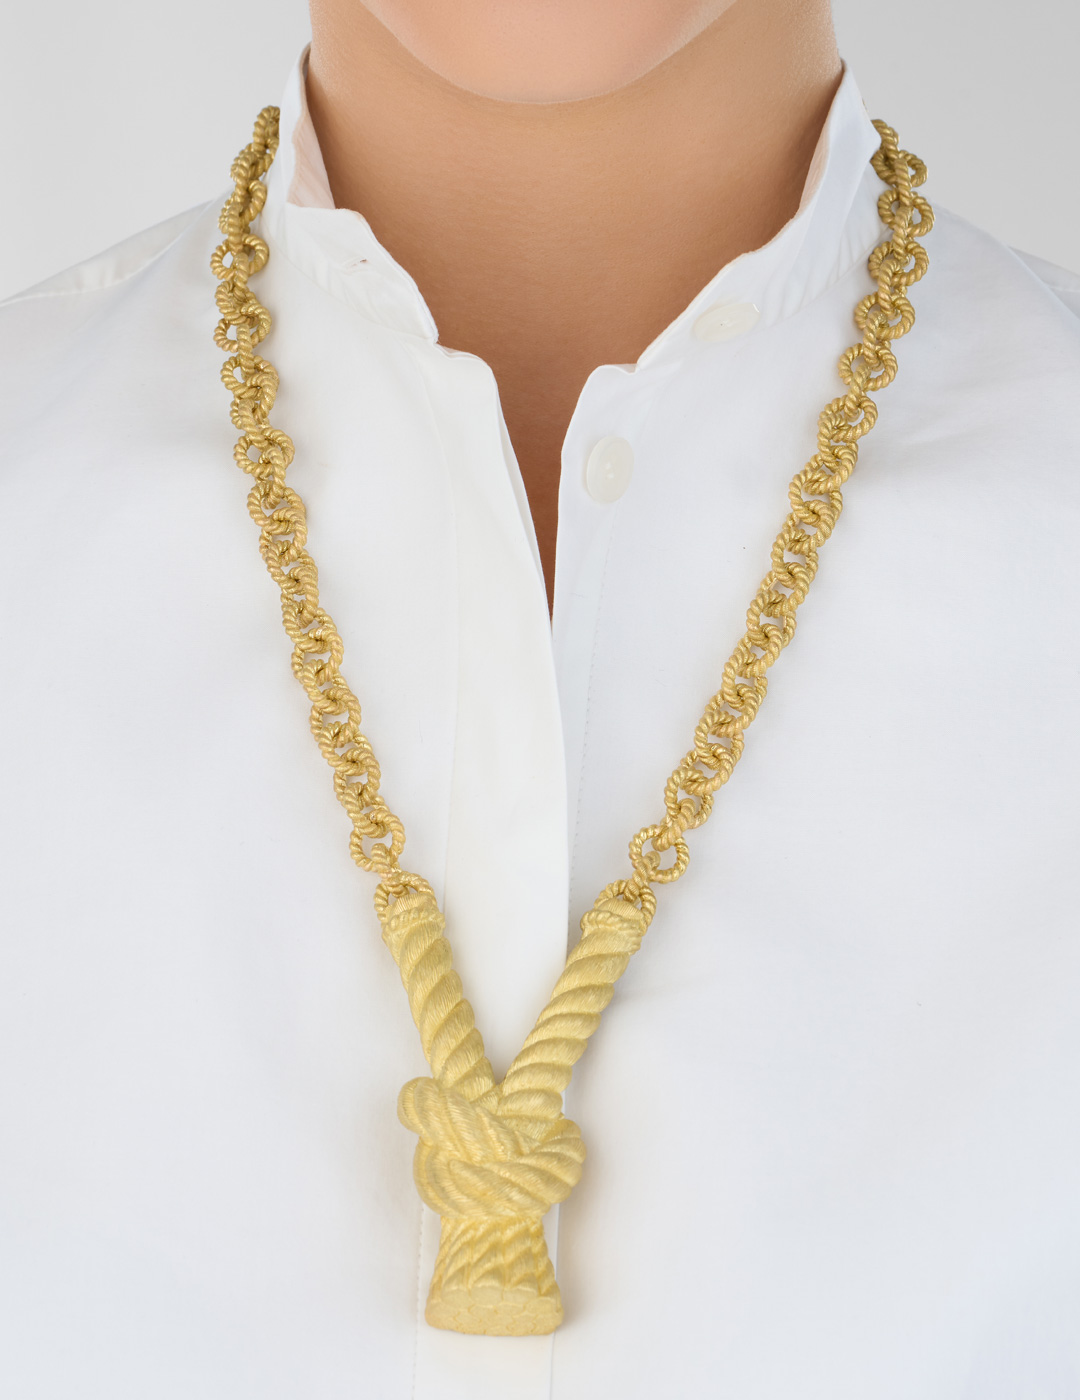 WK-All-Gold-Knot-Nk-2